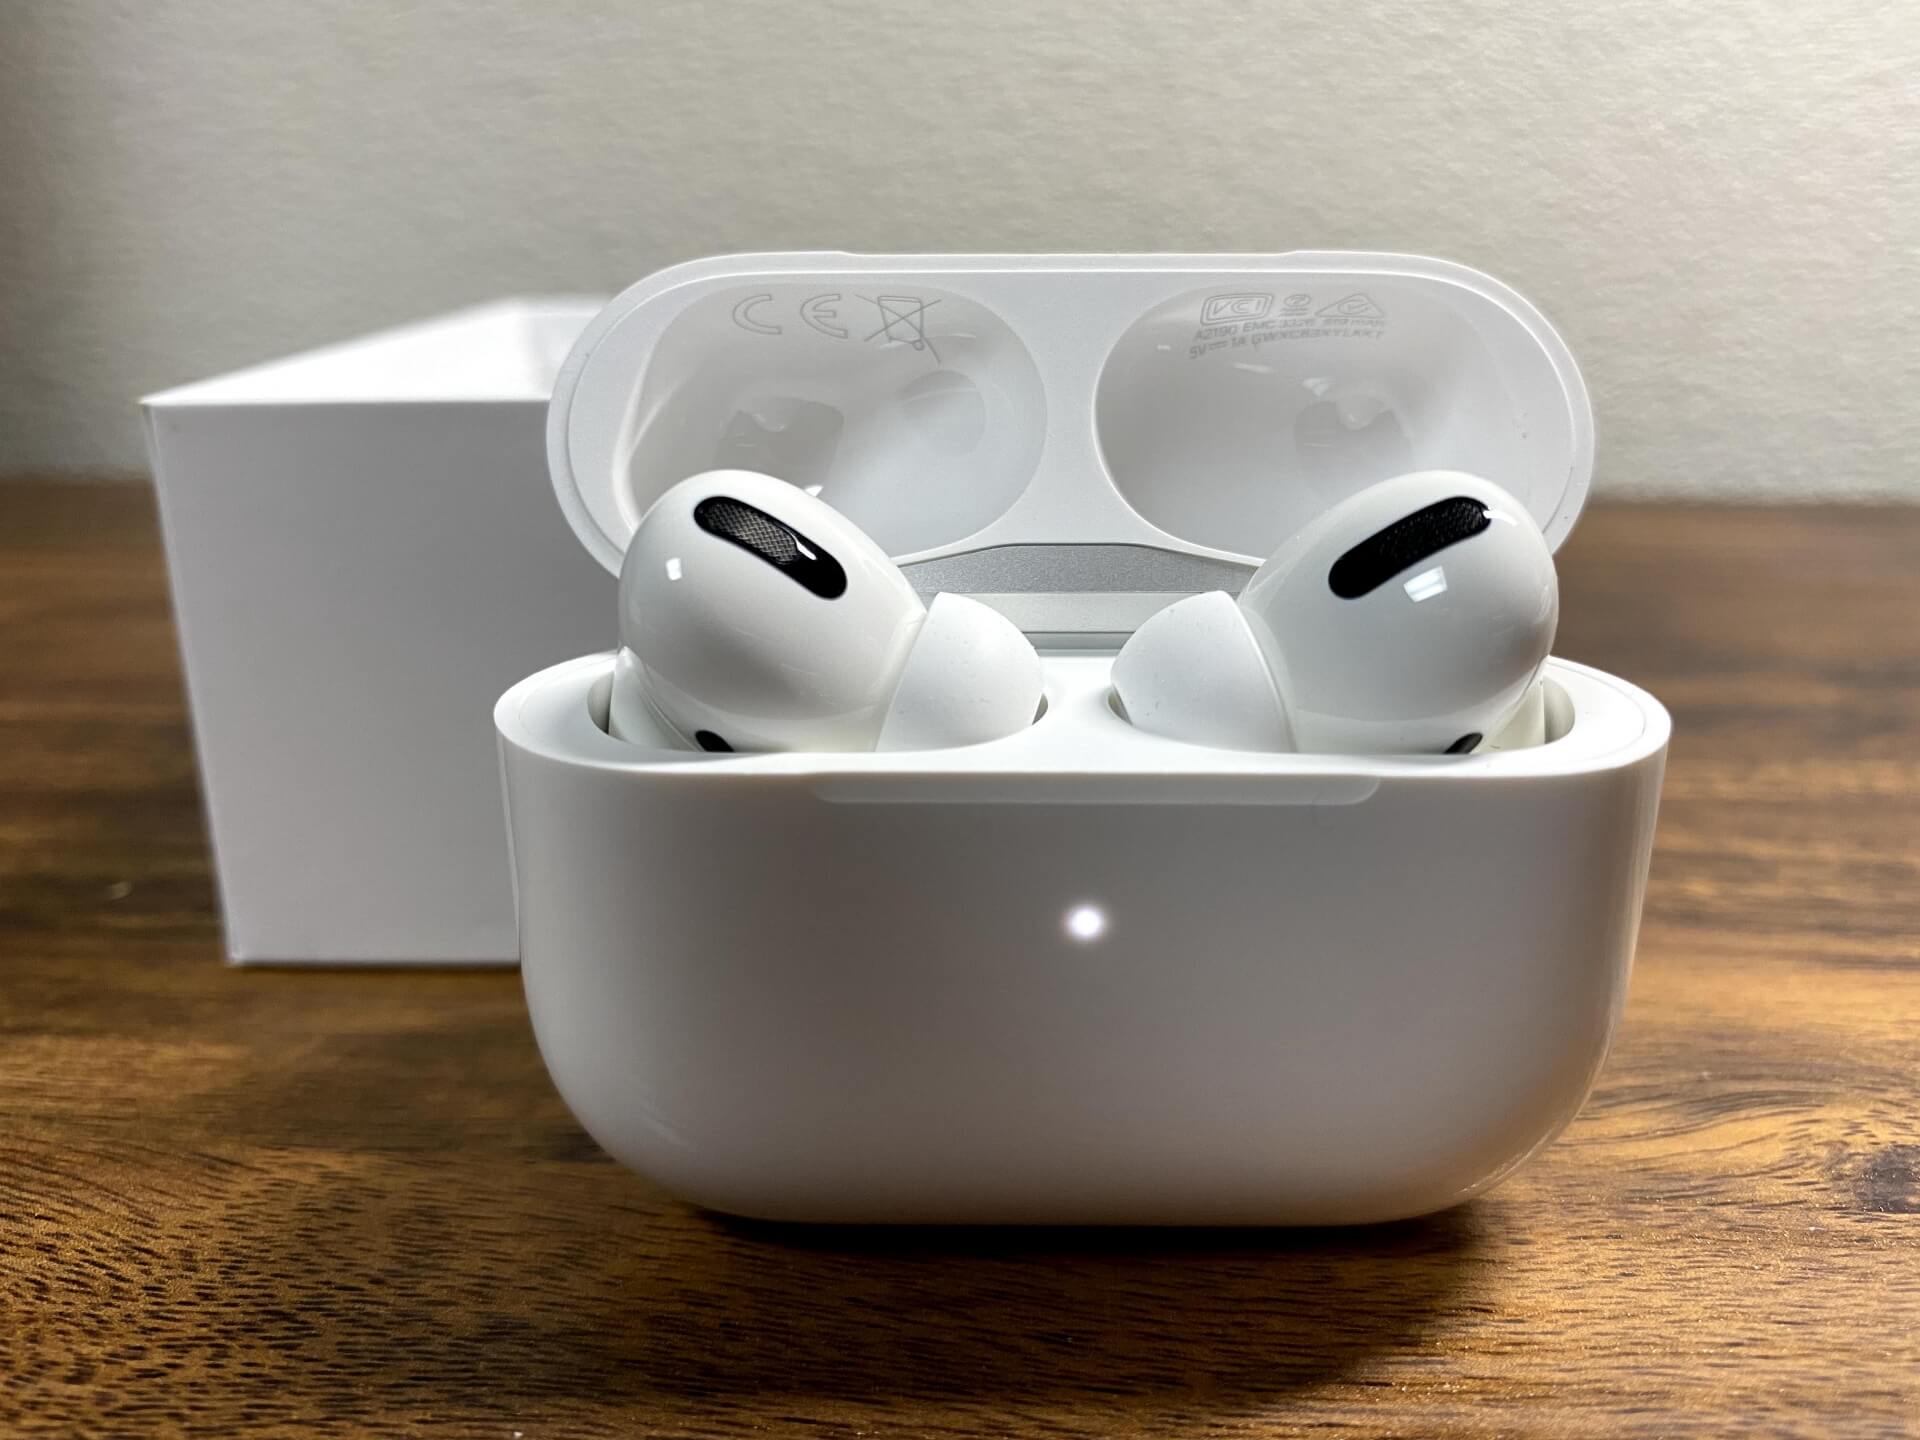 【AirPods 高価買取】AirPods Max、AirPods Pro、AirPodsを高く売るコツとは？【買取クイック】